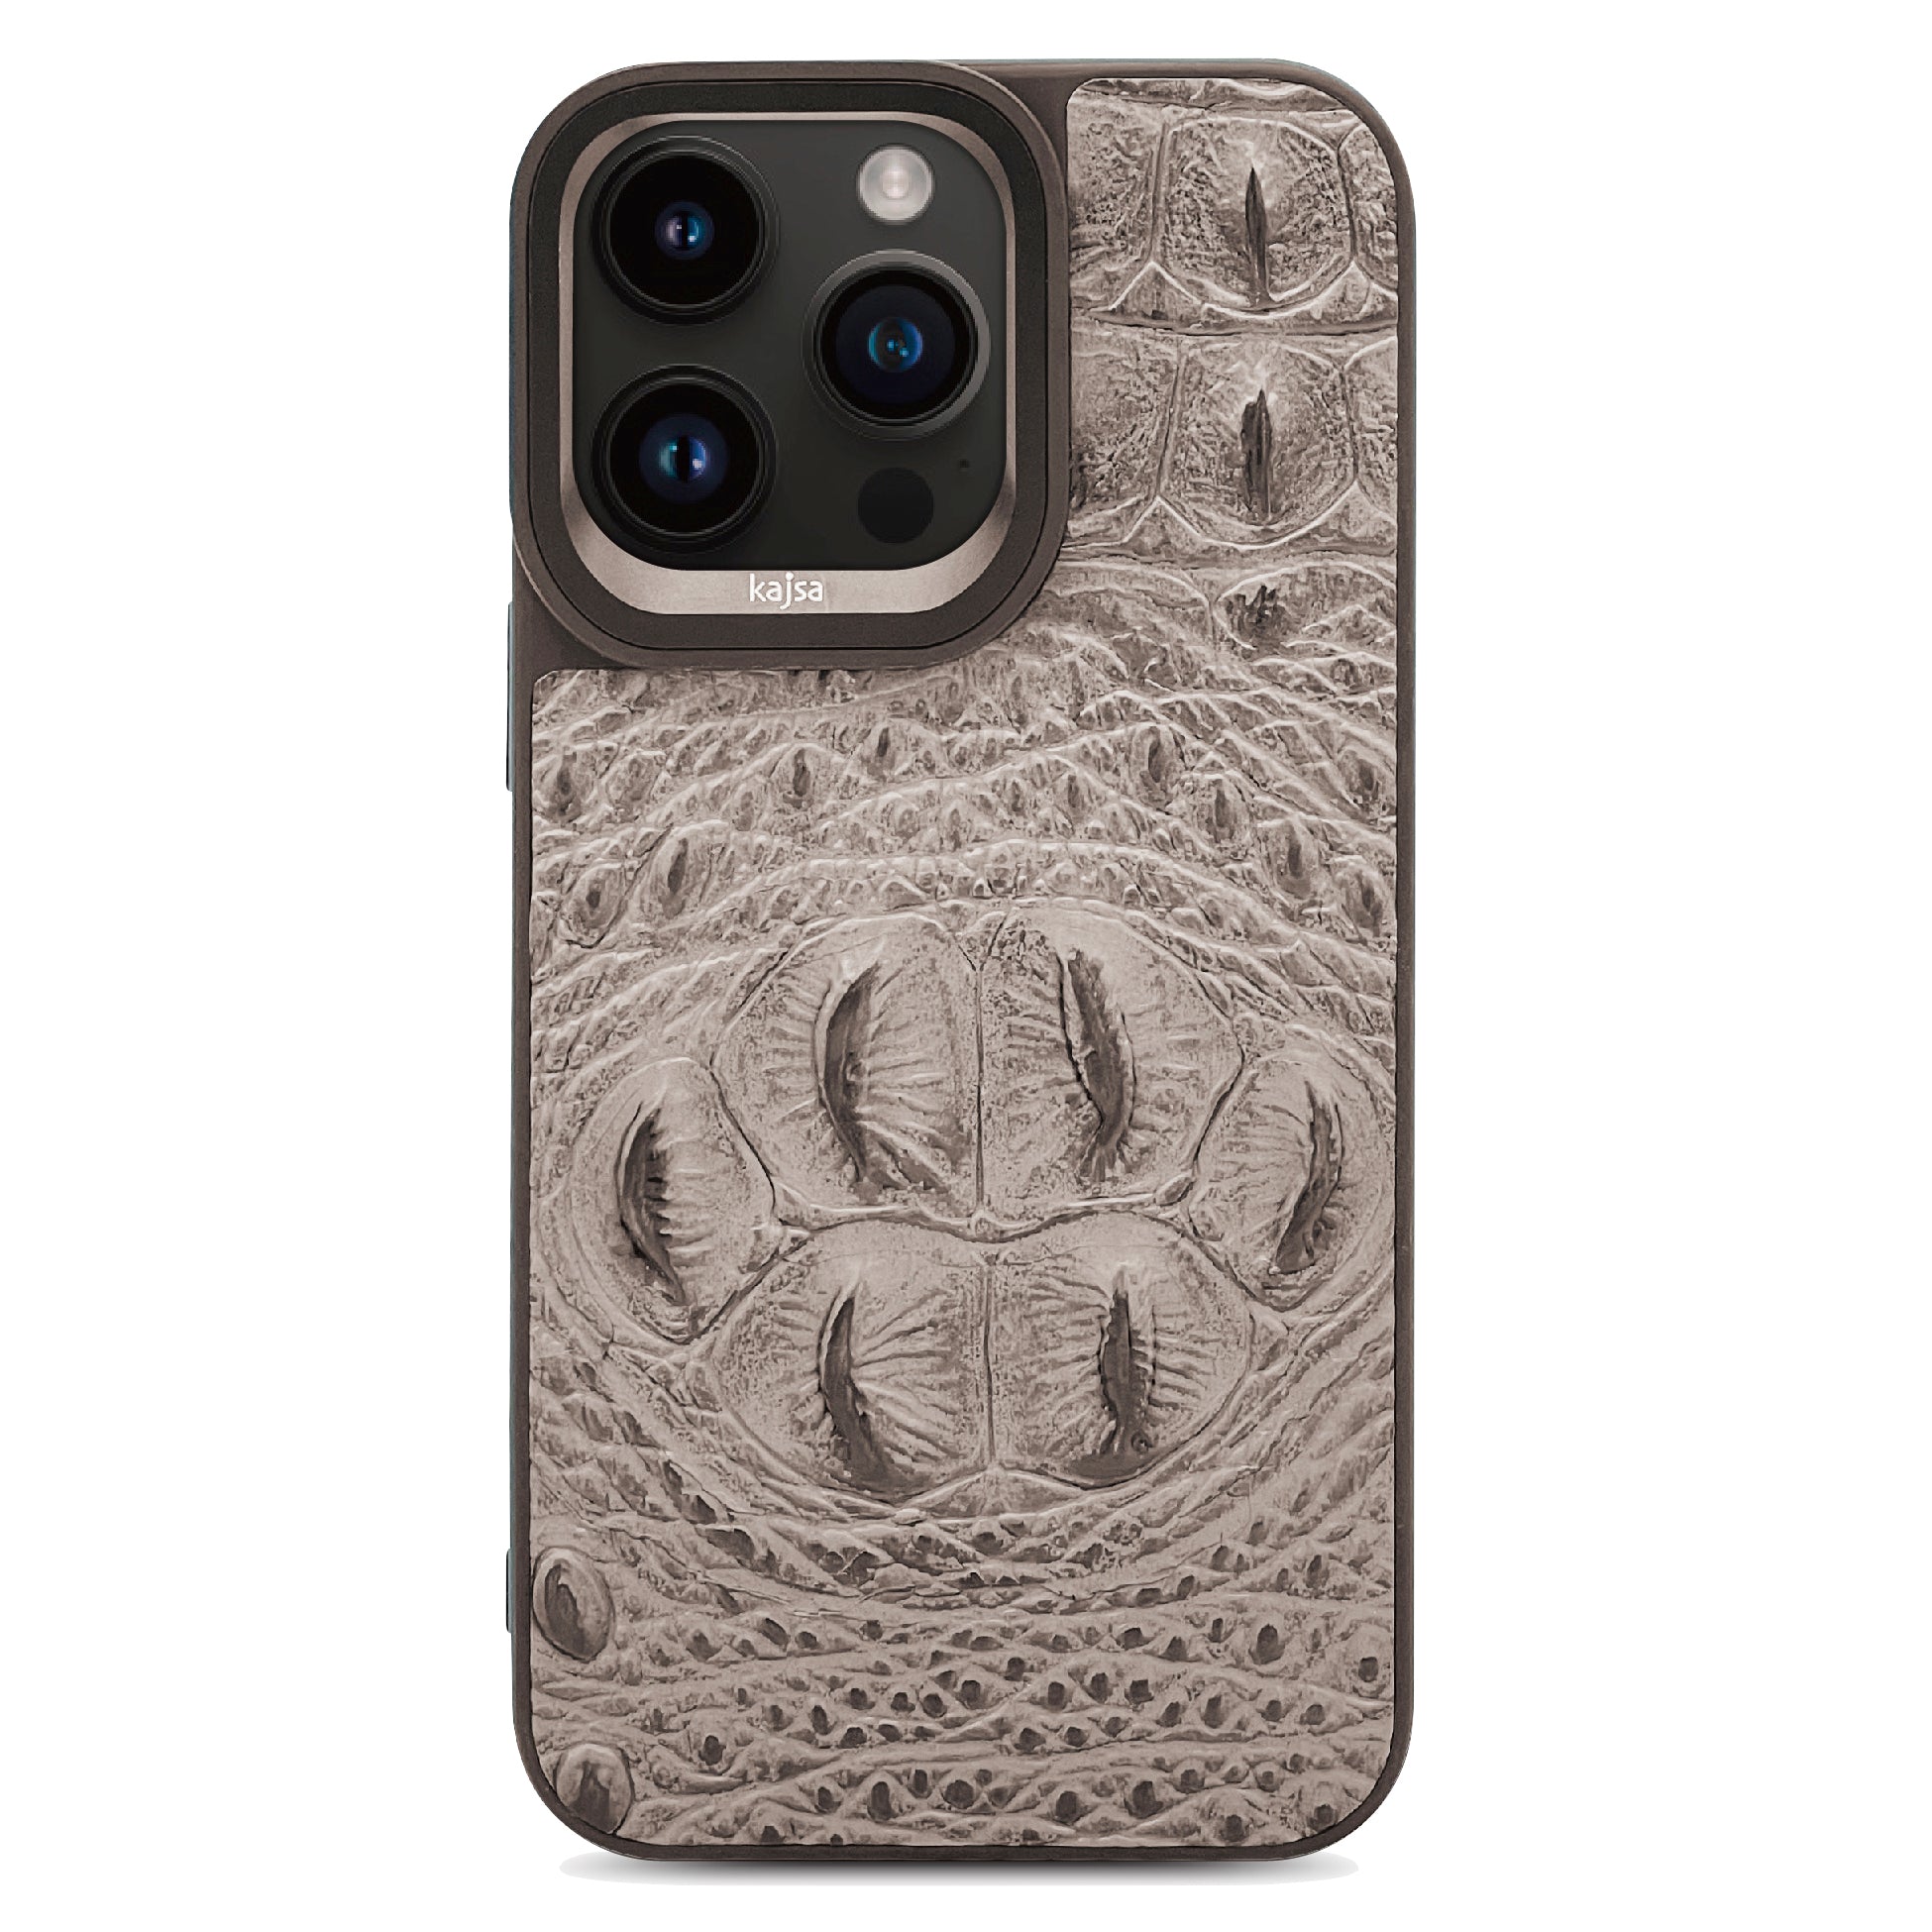 Noble Collection - Dragon Eye Back Case for iPhone 14-Phone Case- phone case - phone cases- phone cover- iphone cover- iphone case- iphone cases- leather case- leather cases- DIYCASE - custom case - leather cover - hand strap case - croco pattern case - snake pattern case - carbon fiber phone case - phone case brand - unique phone case - high quality - phone case brand - protective case - buy phone case hong kong - online buy phone case - iphone‎手機殼 - 客製化手機殼 - samsung ‎手機殼 - 香港手機殼 - 買電話殼